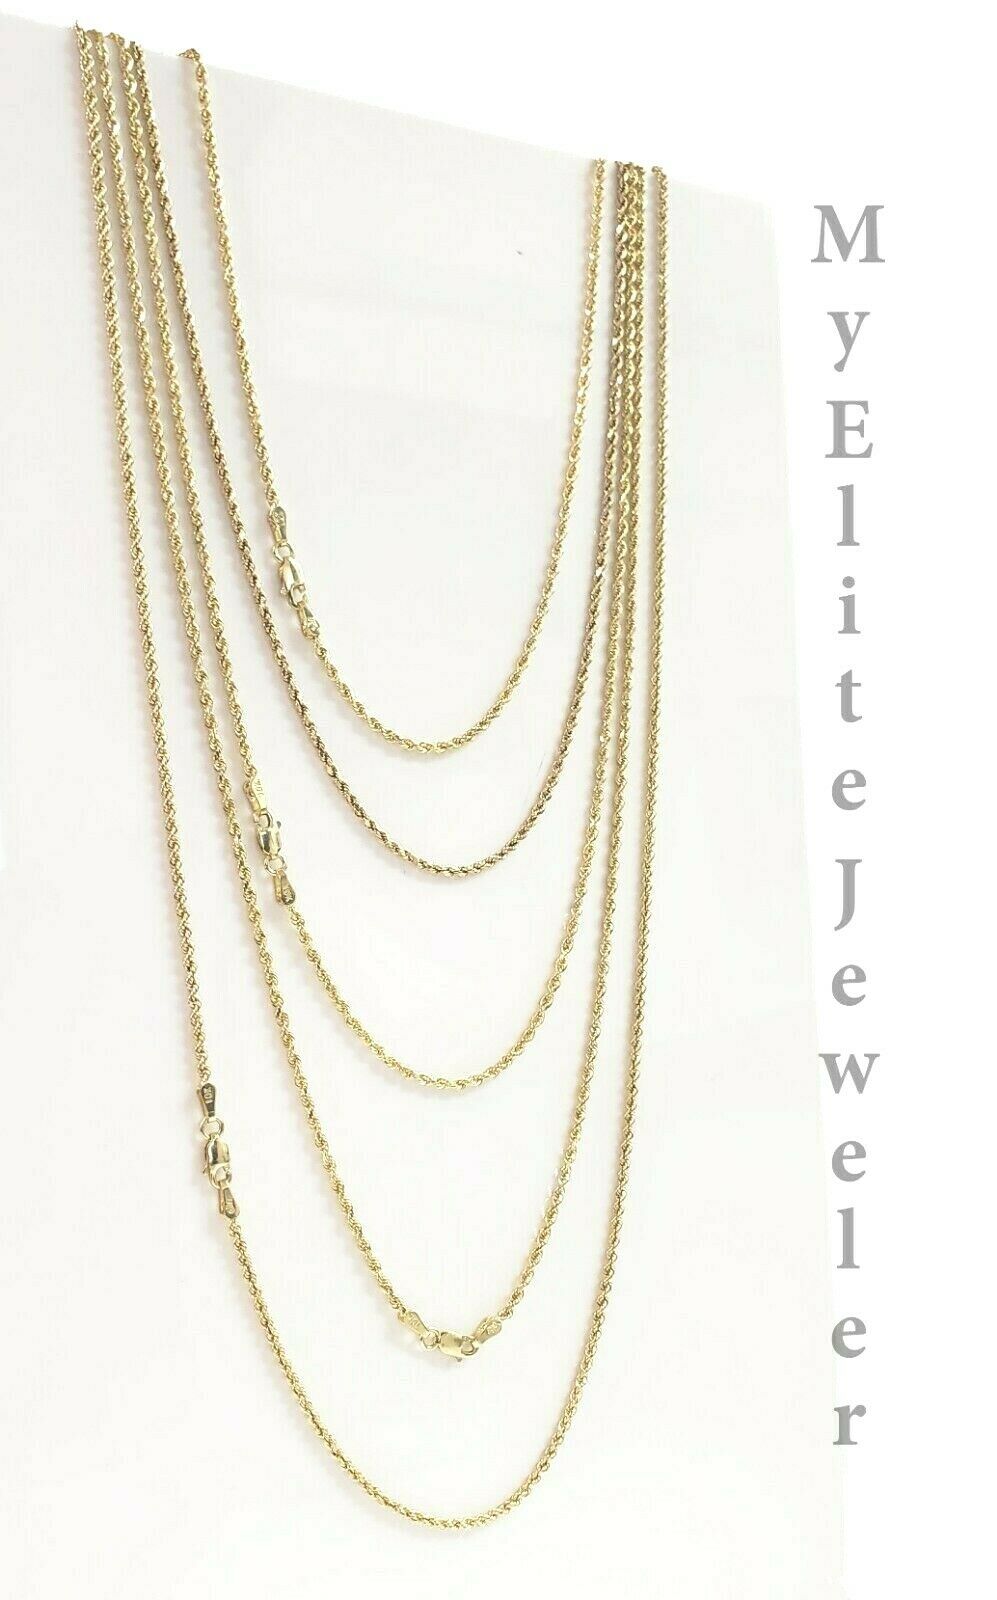 Personalized layered sideways initials necklace in Sterling Silver or Solid  Gold: 10K, 14K or 18K